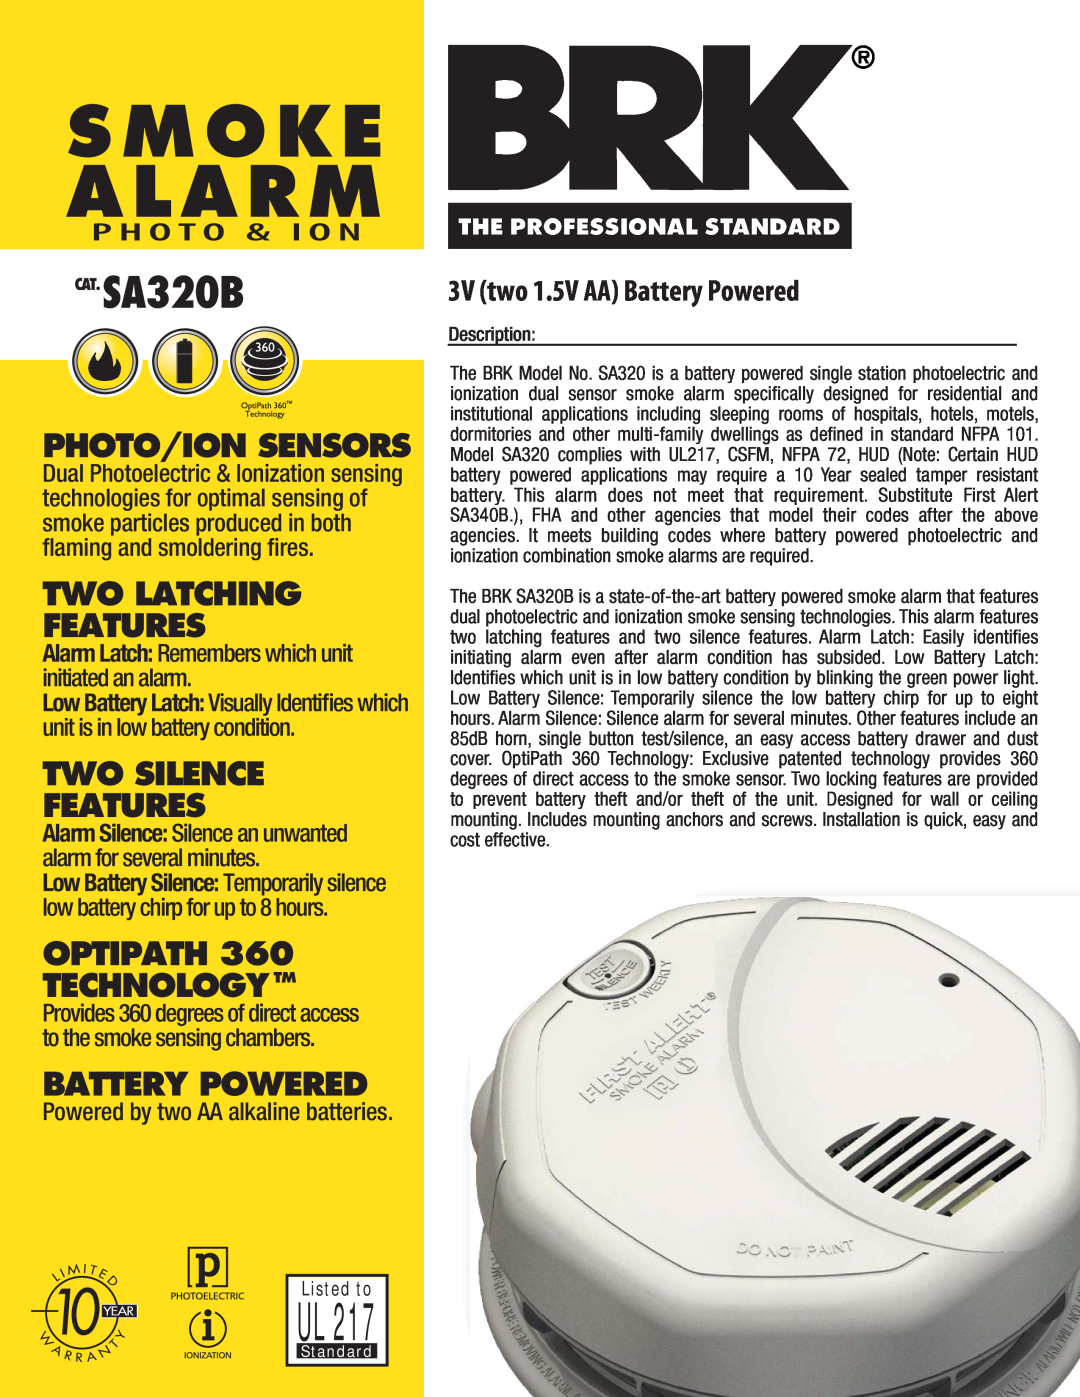 BRK electronic manual Smoke Alarm, CAT.SA320B, Photo/Ion Sensors, Two Latching Features, Two Silence Features 